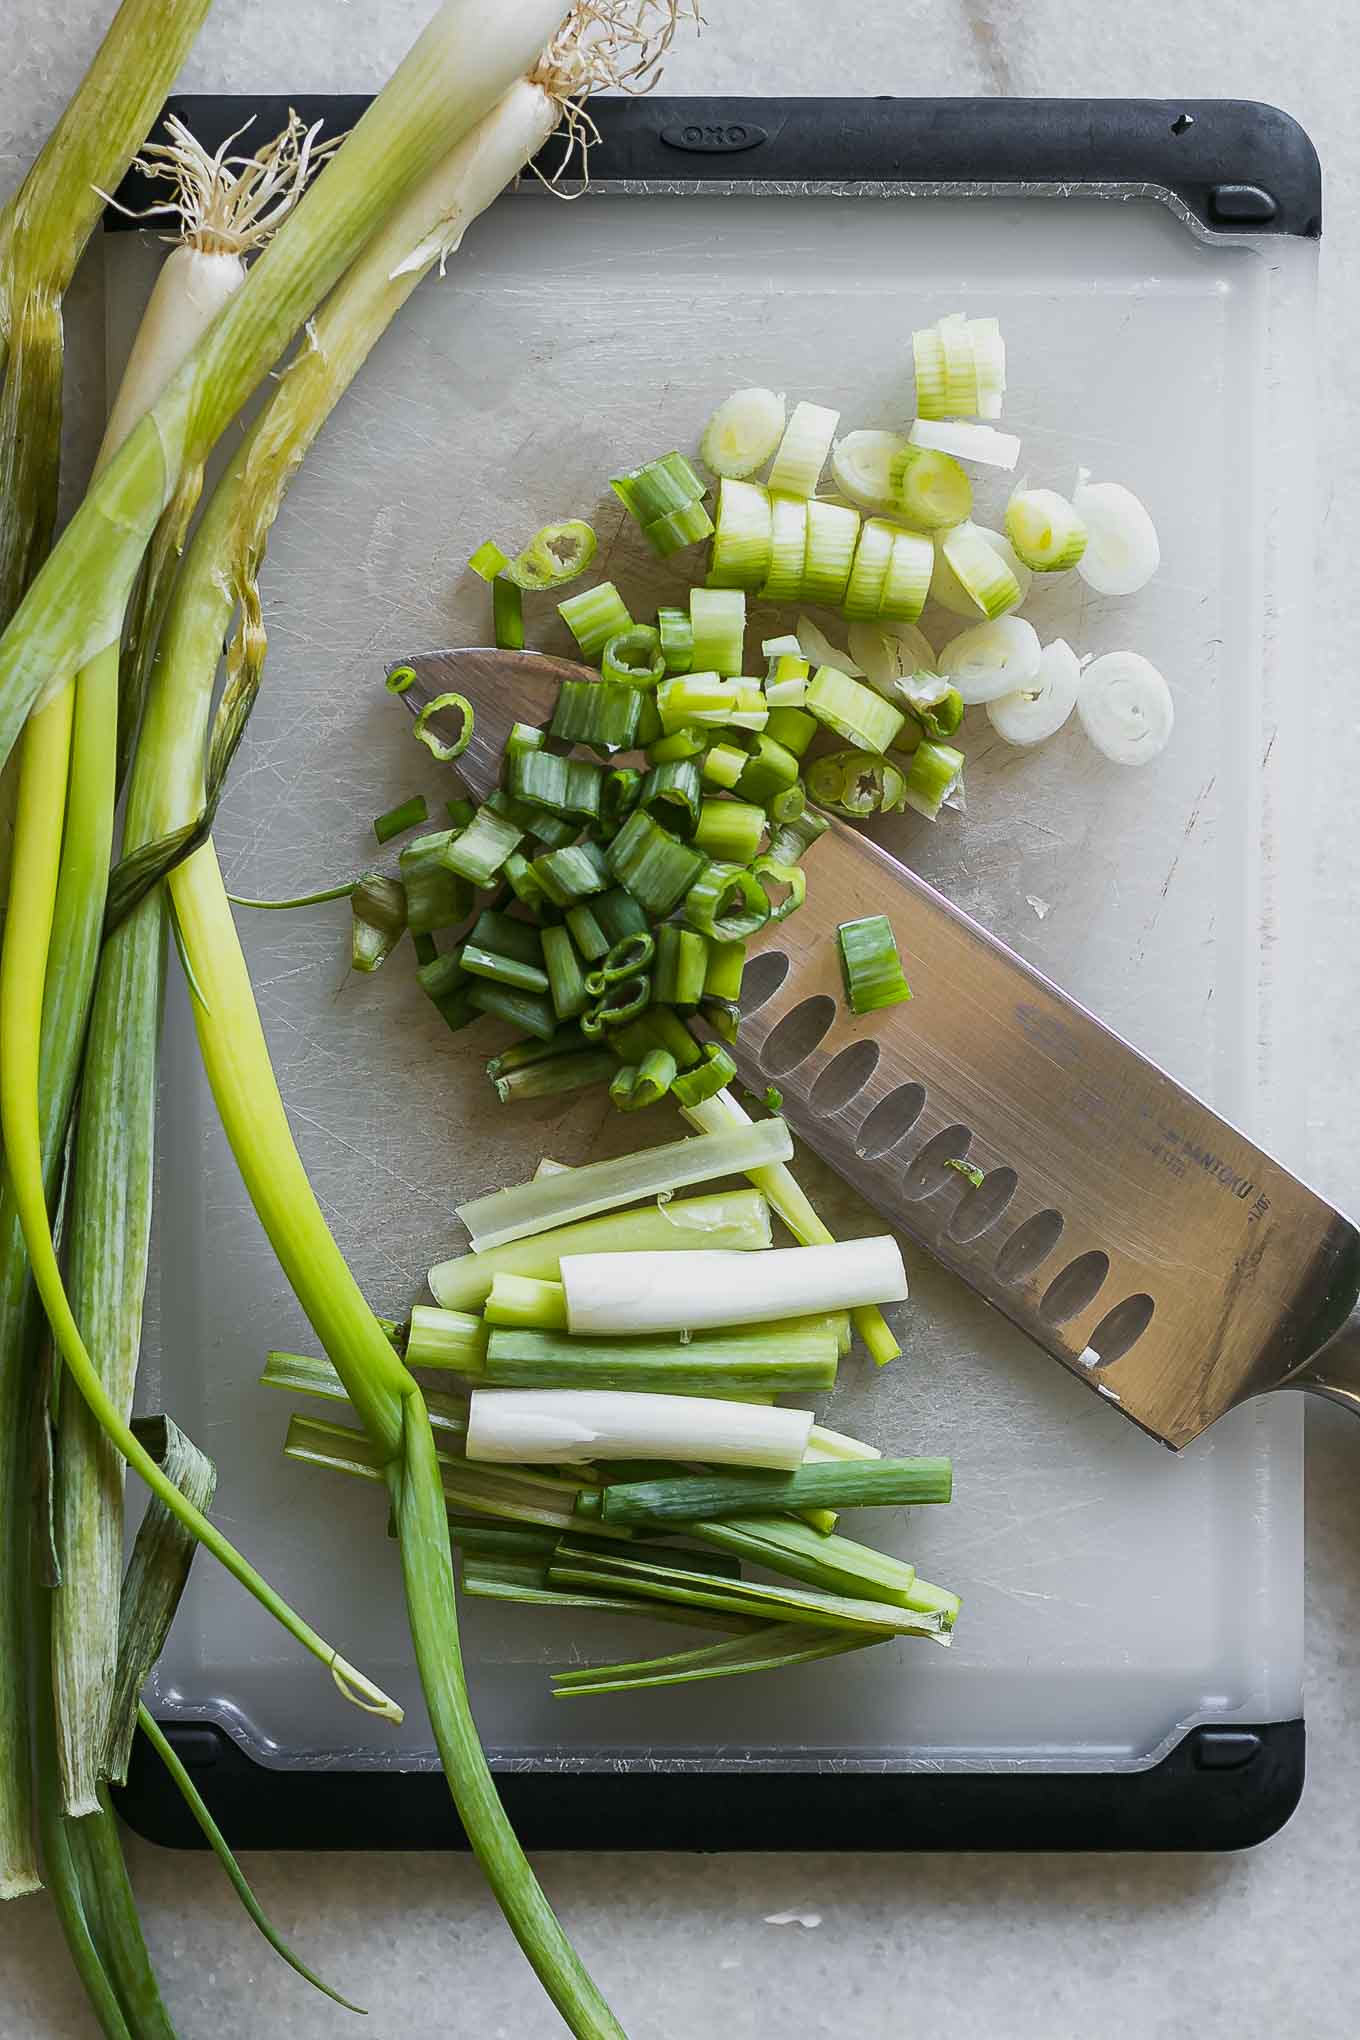 sliced and cut spears of green onions on a cutting board